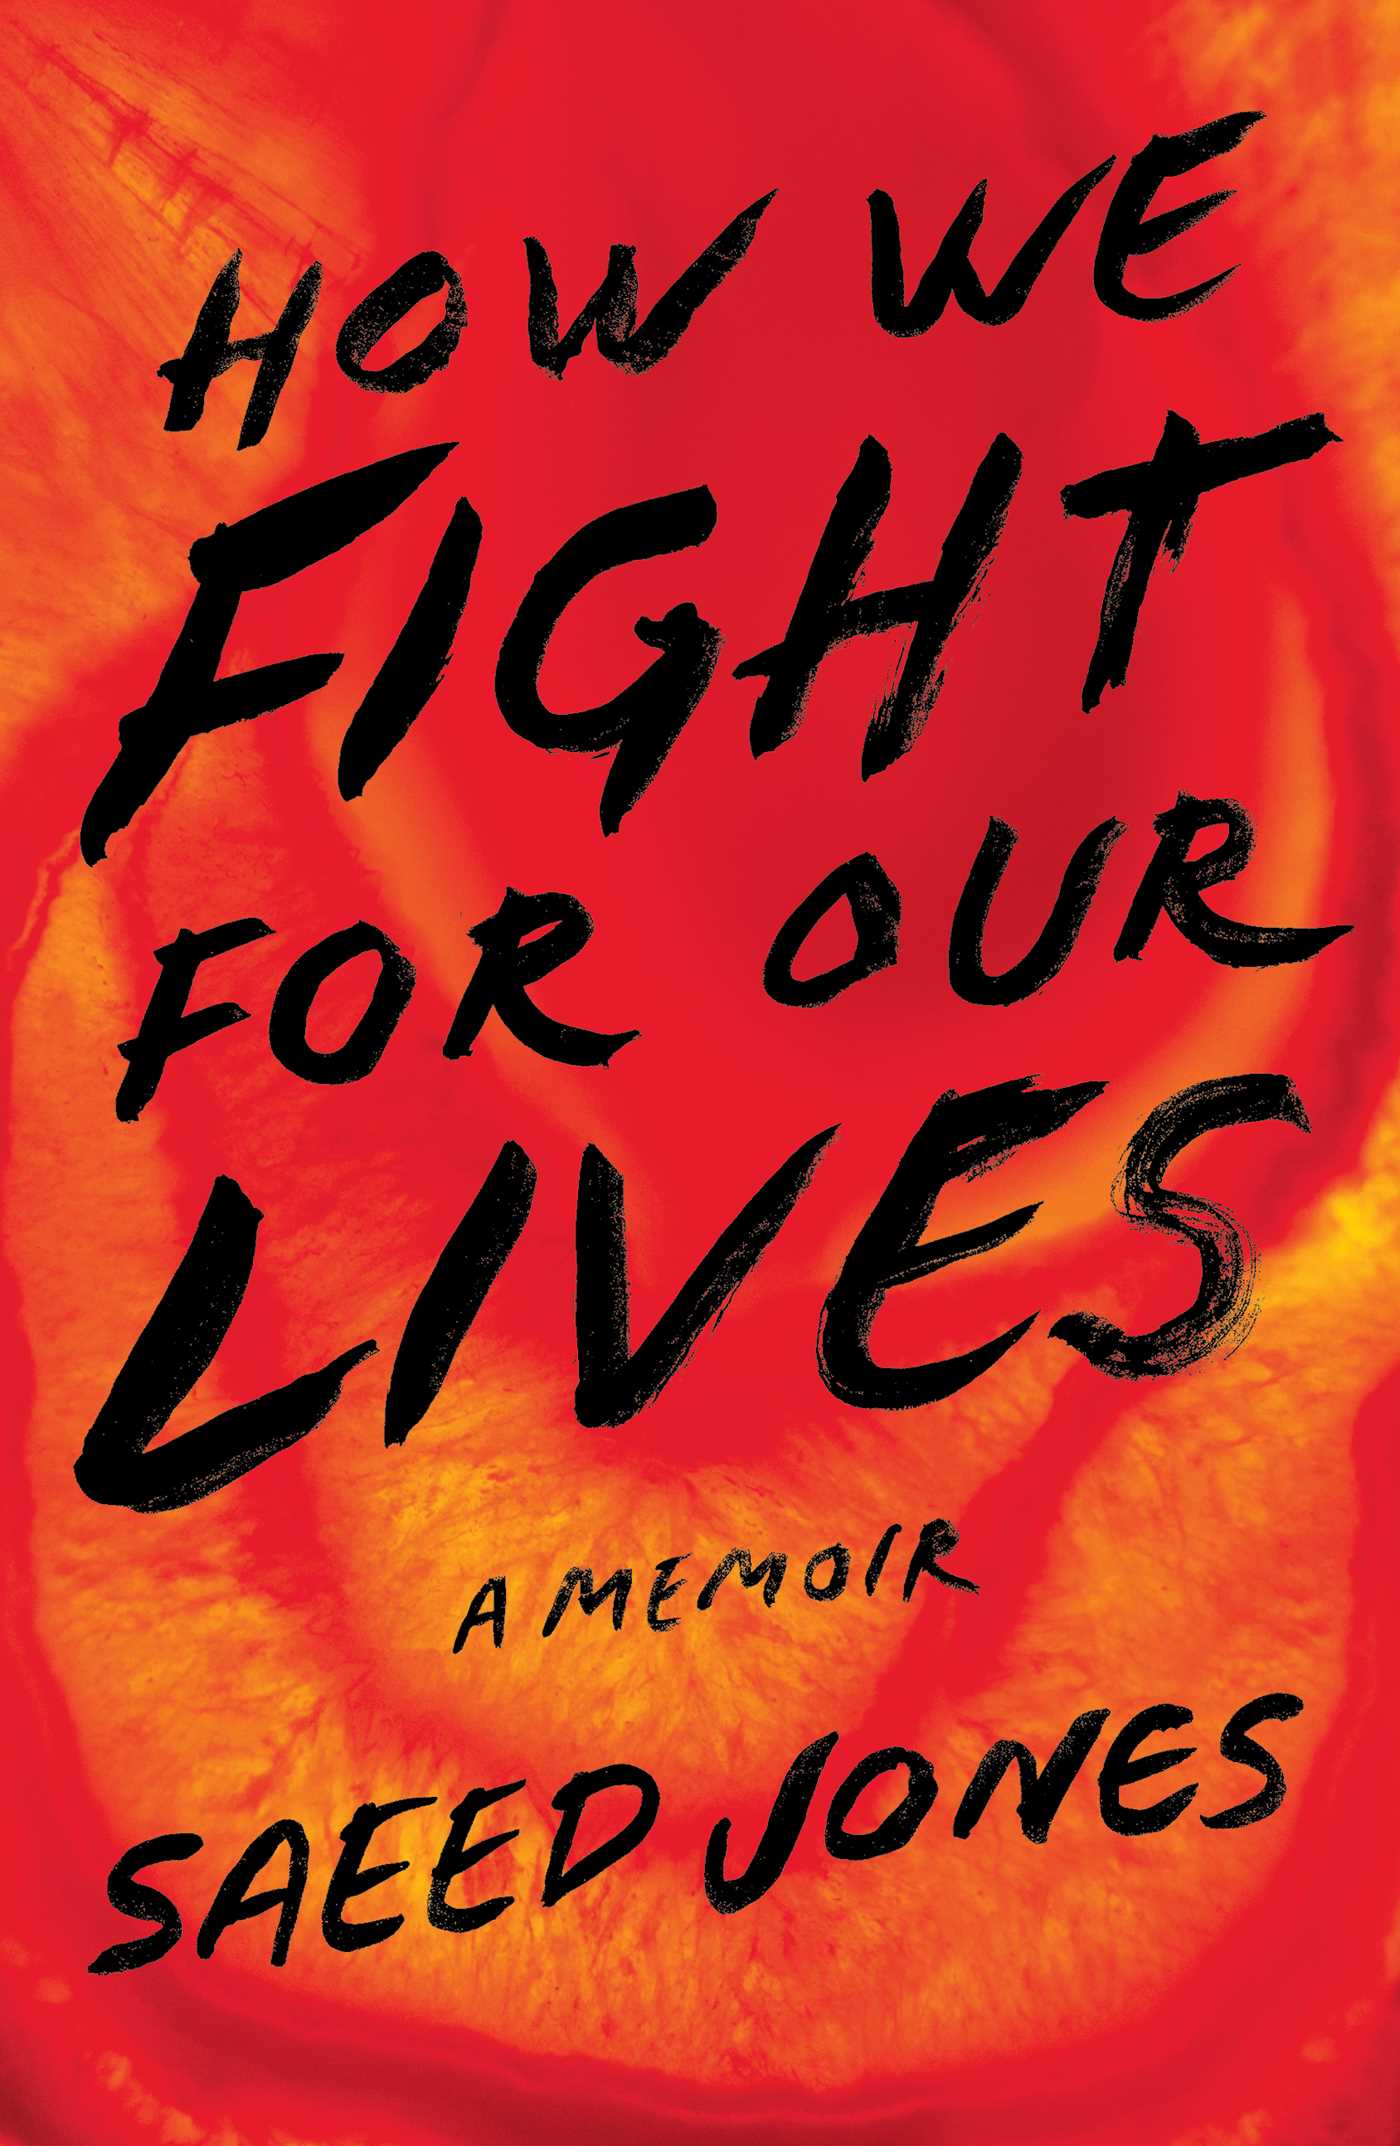 'How We Fight For Our Lives' by Saeed Jones